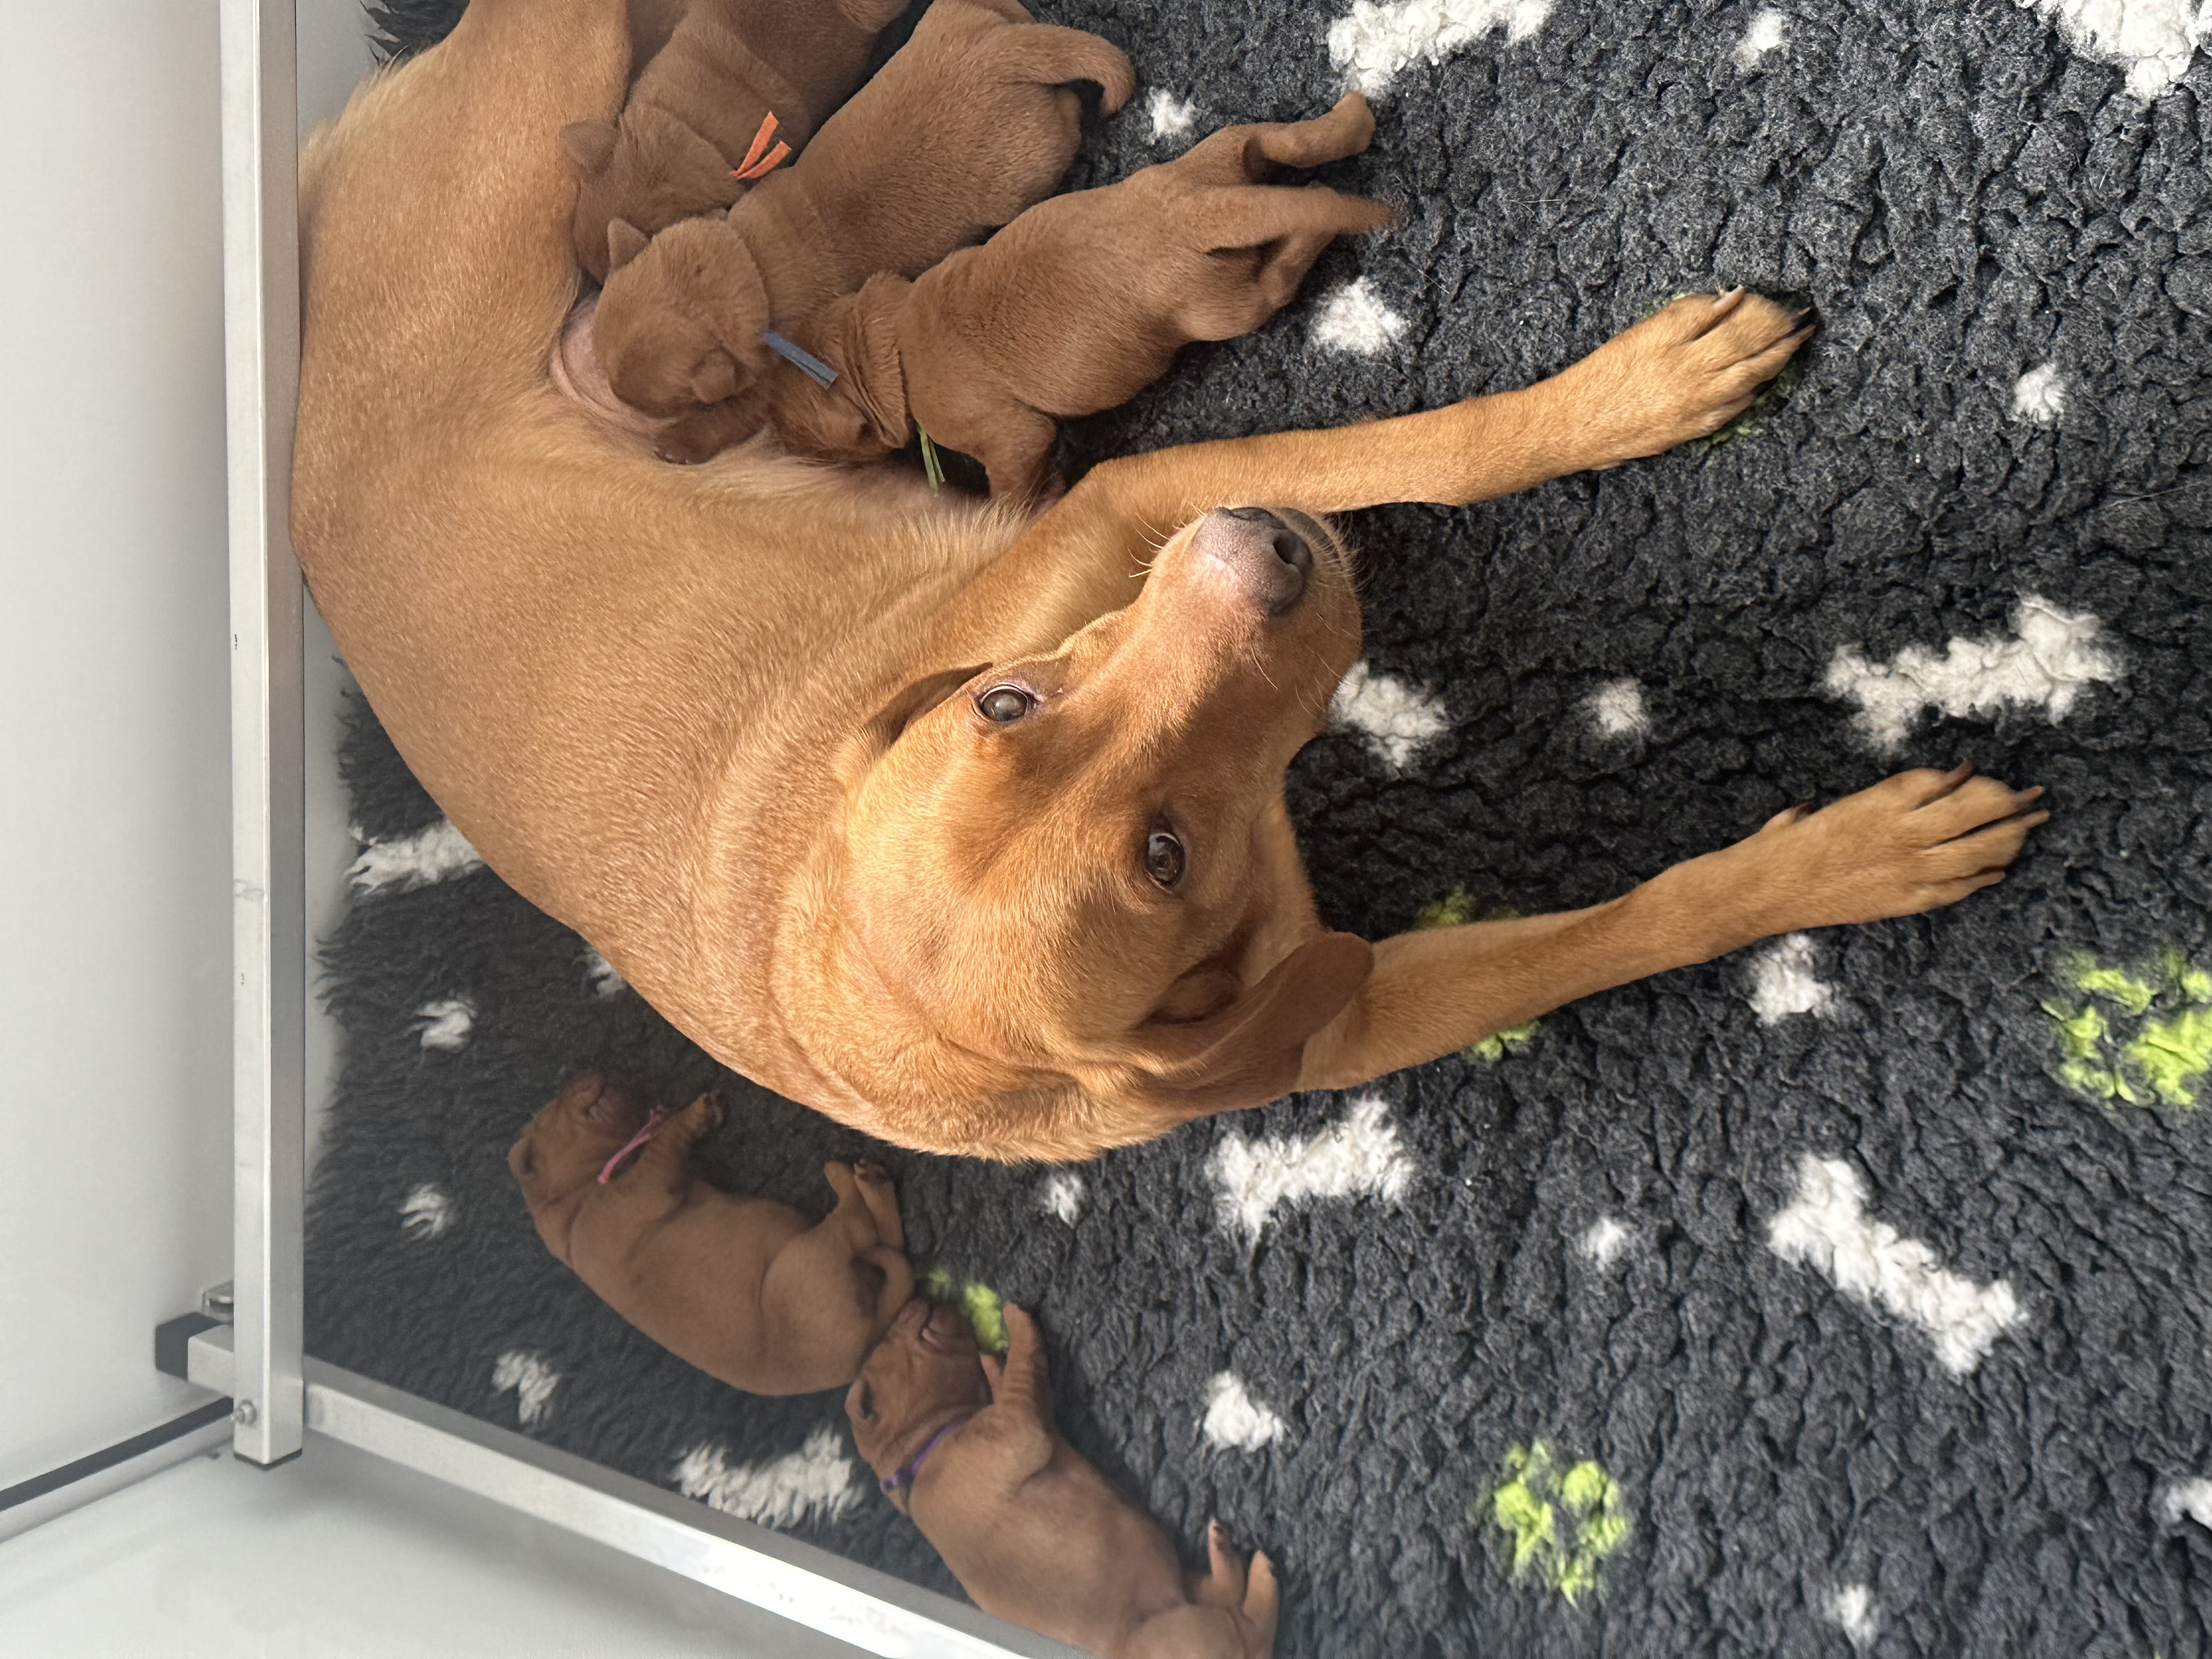 Poppy with her puppies